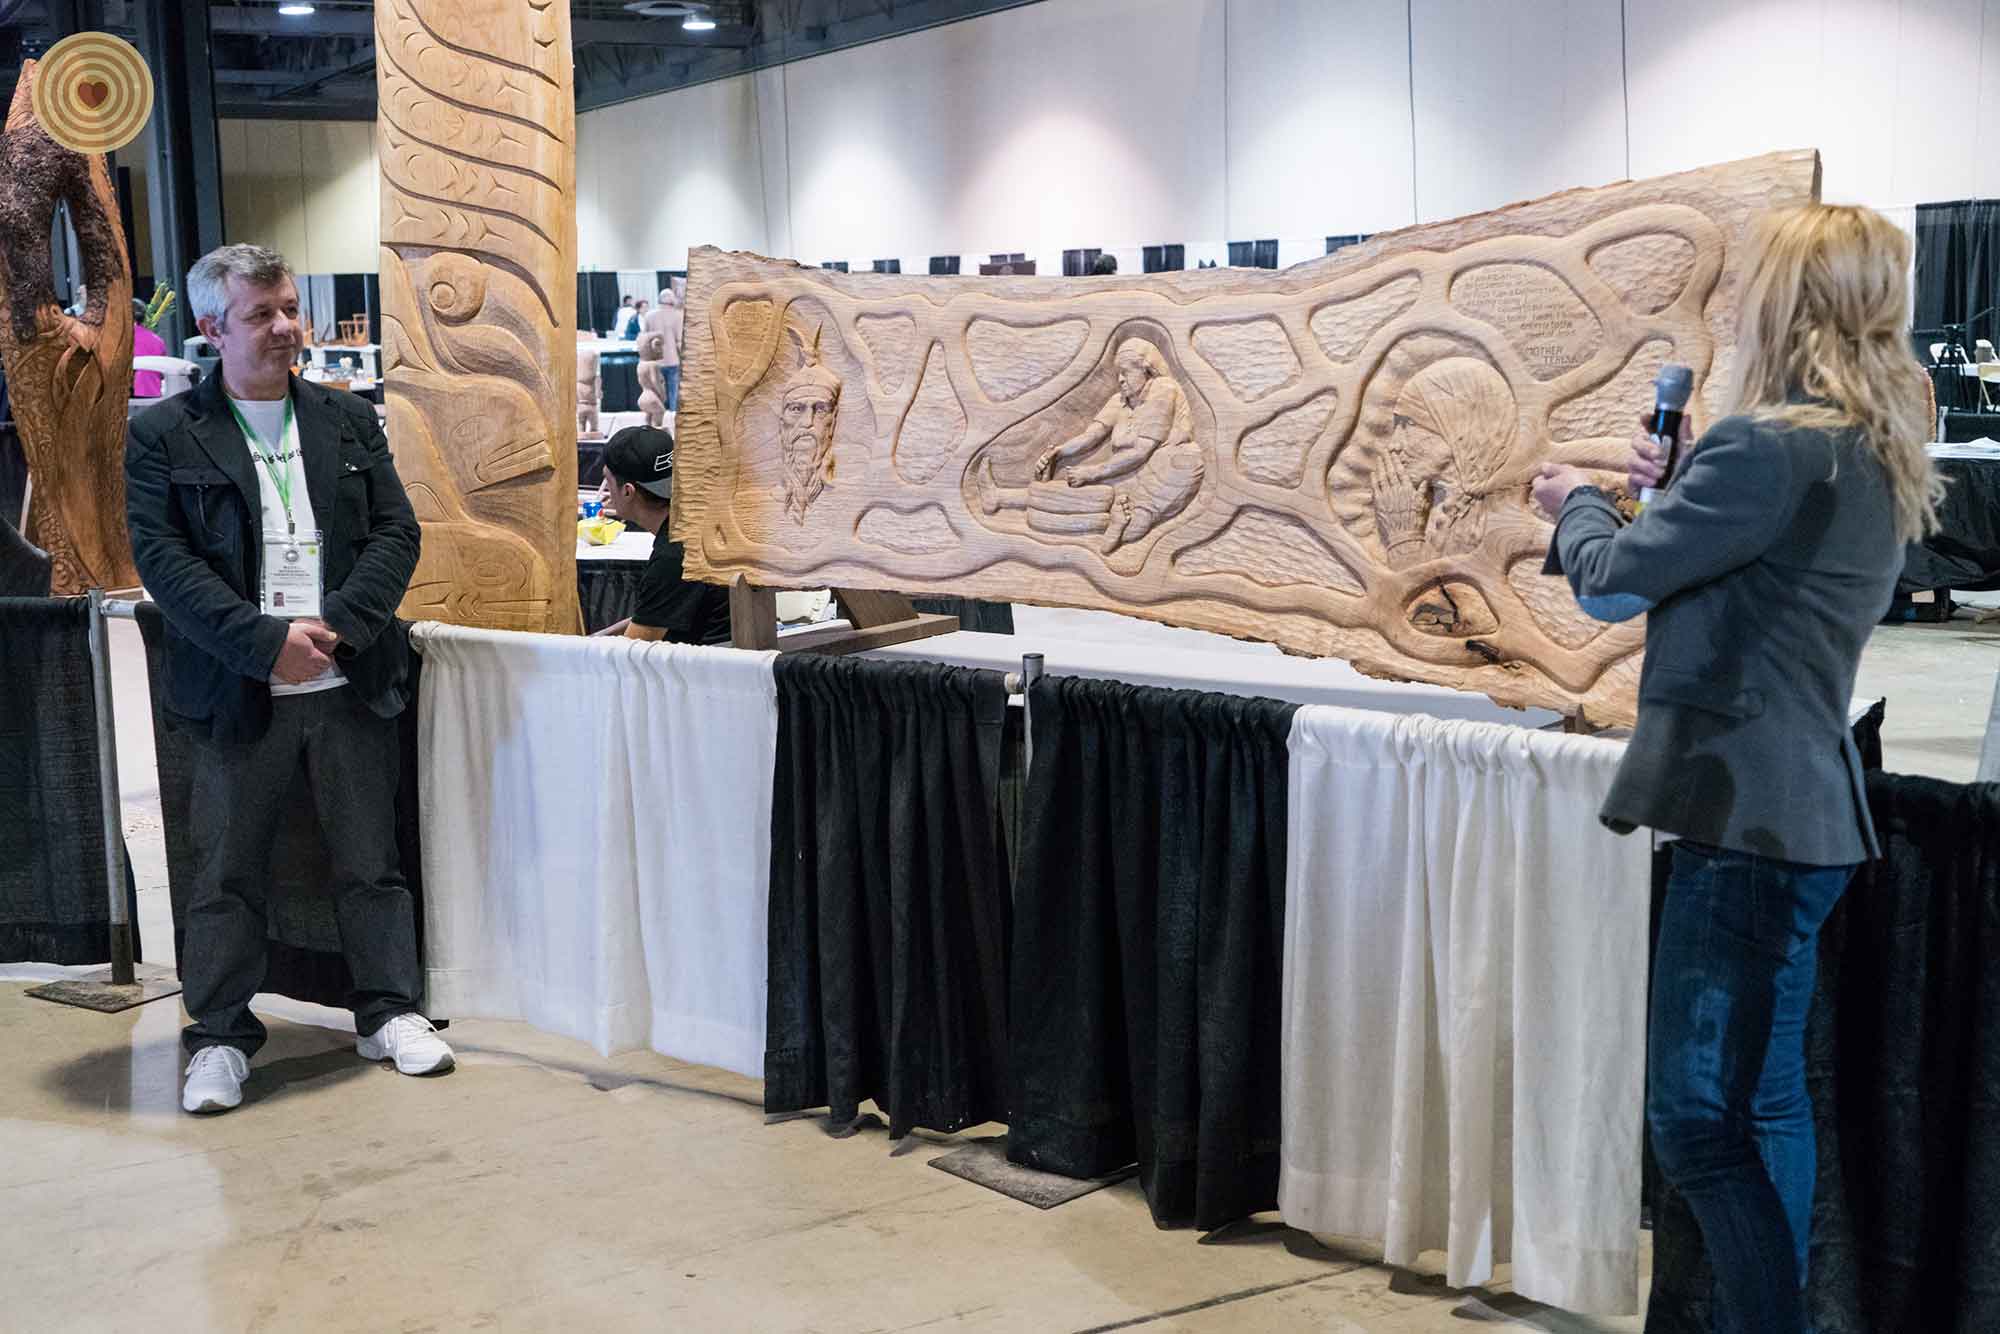 exhibition, wood carving